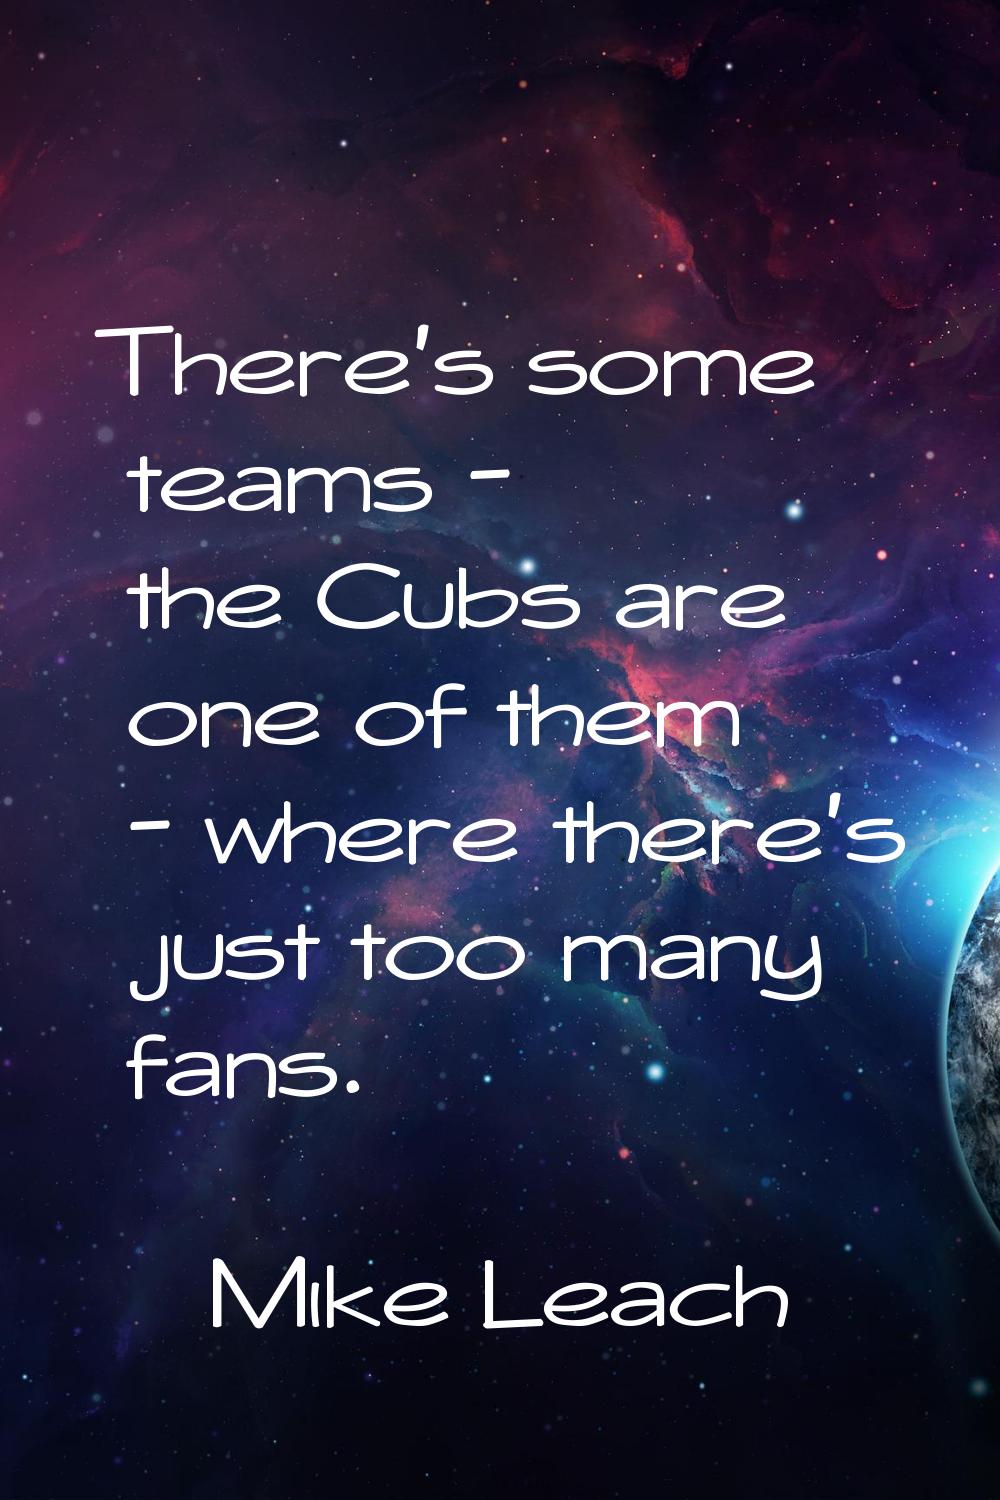 There's some teams - the Cubs are one of them - where there's just too many fans.